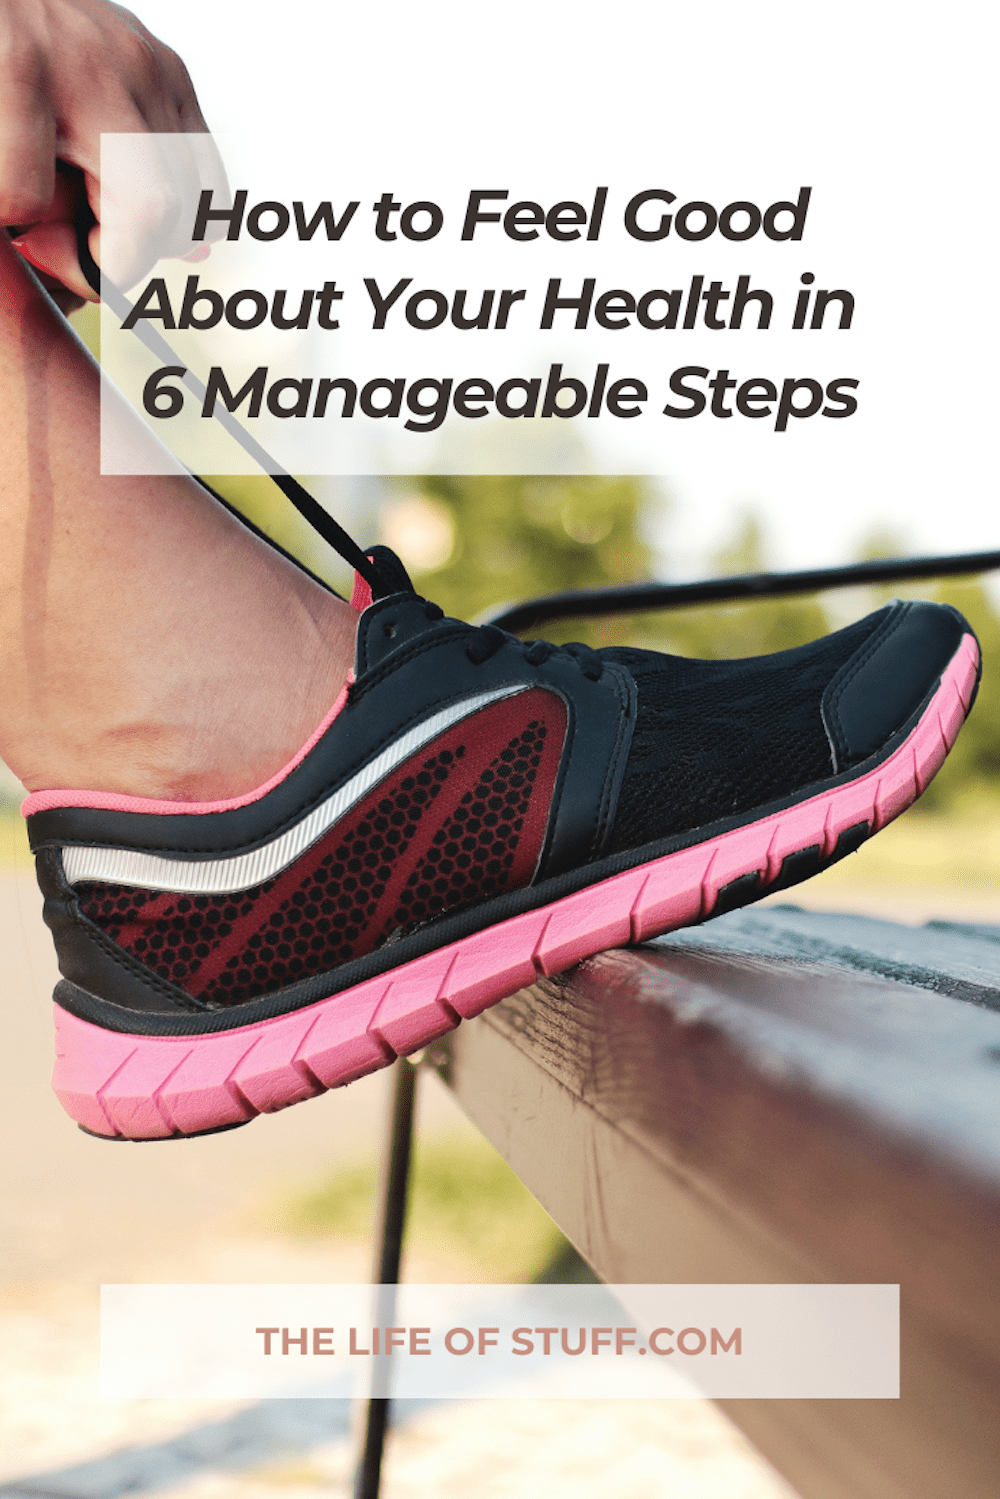 How to Feel Good About Your Health in 6 Manageable Steps - The Life of Stuff